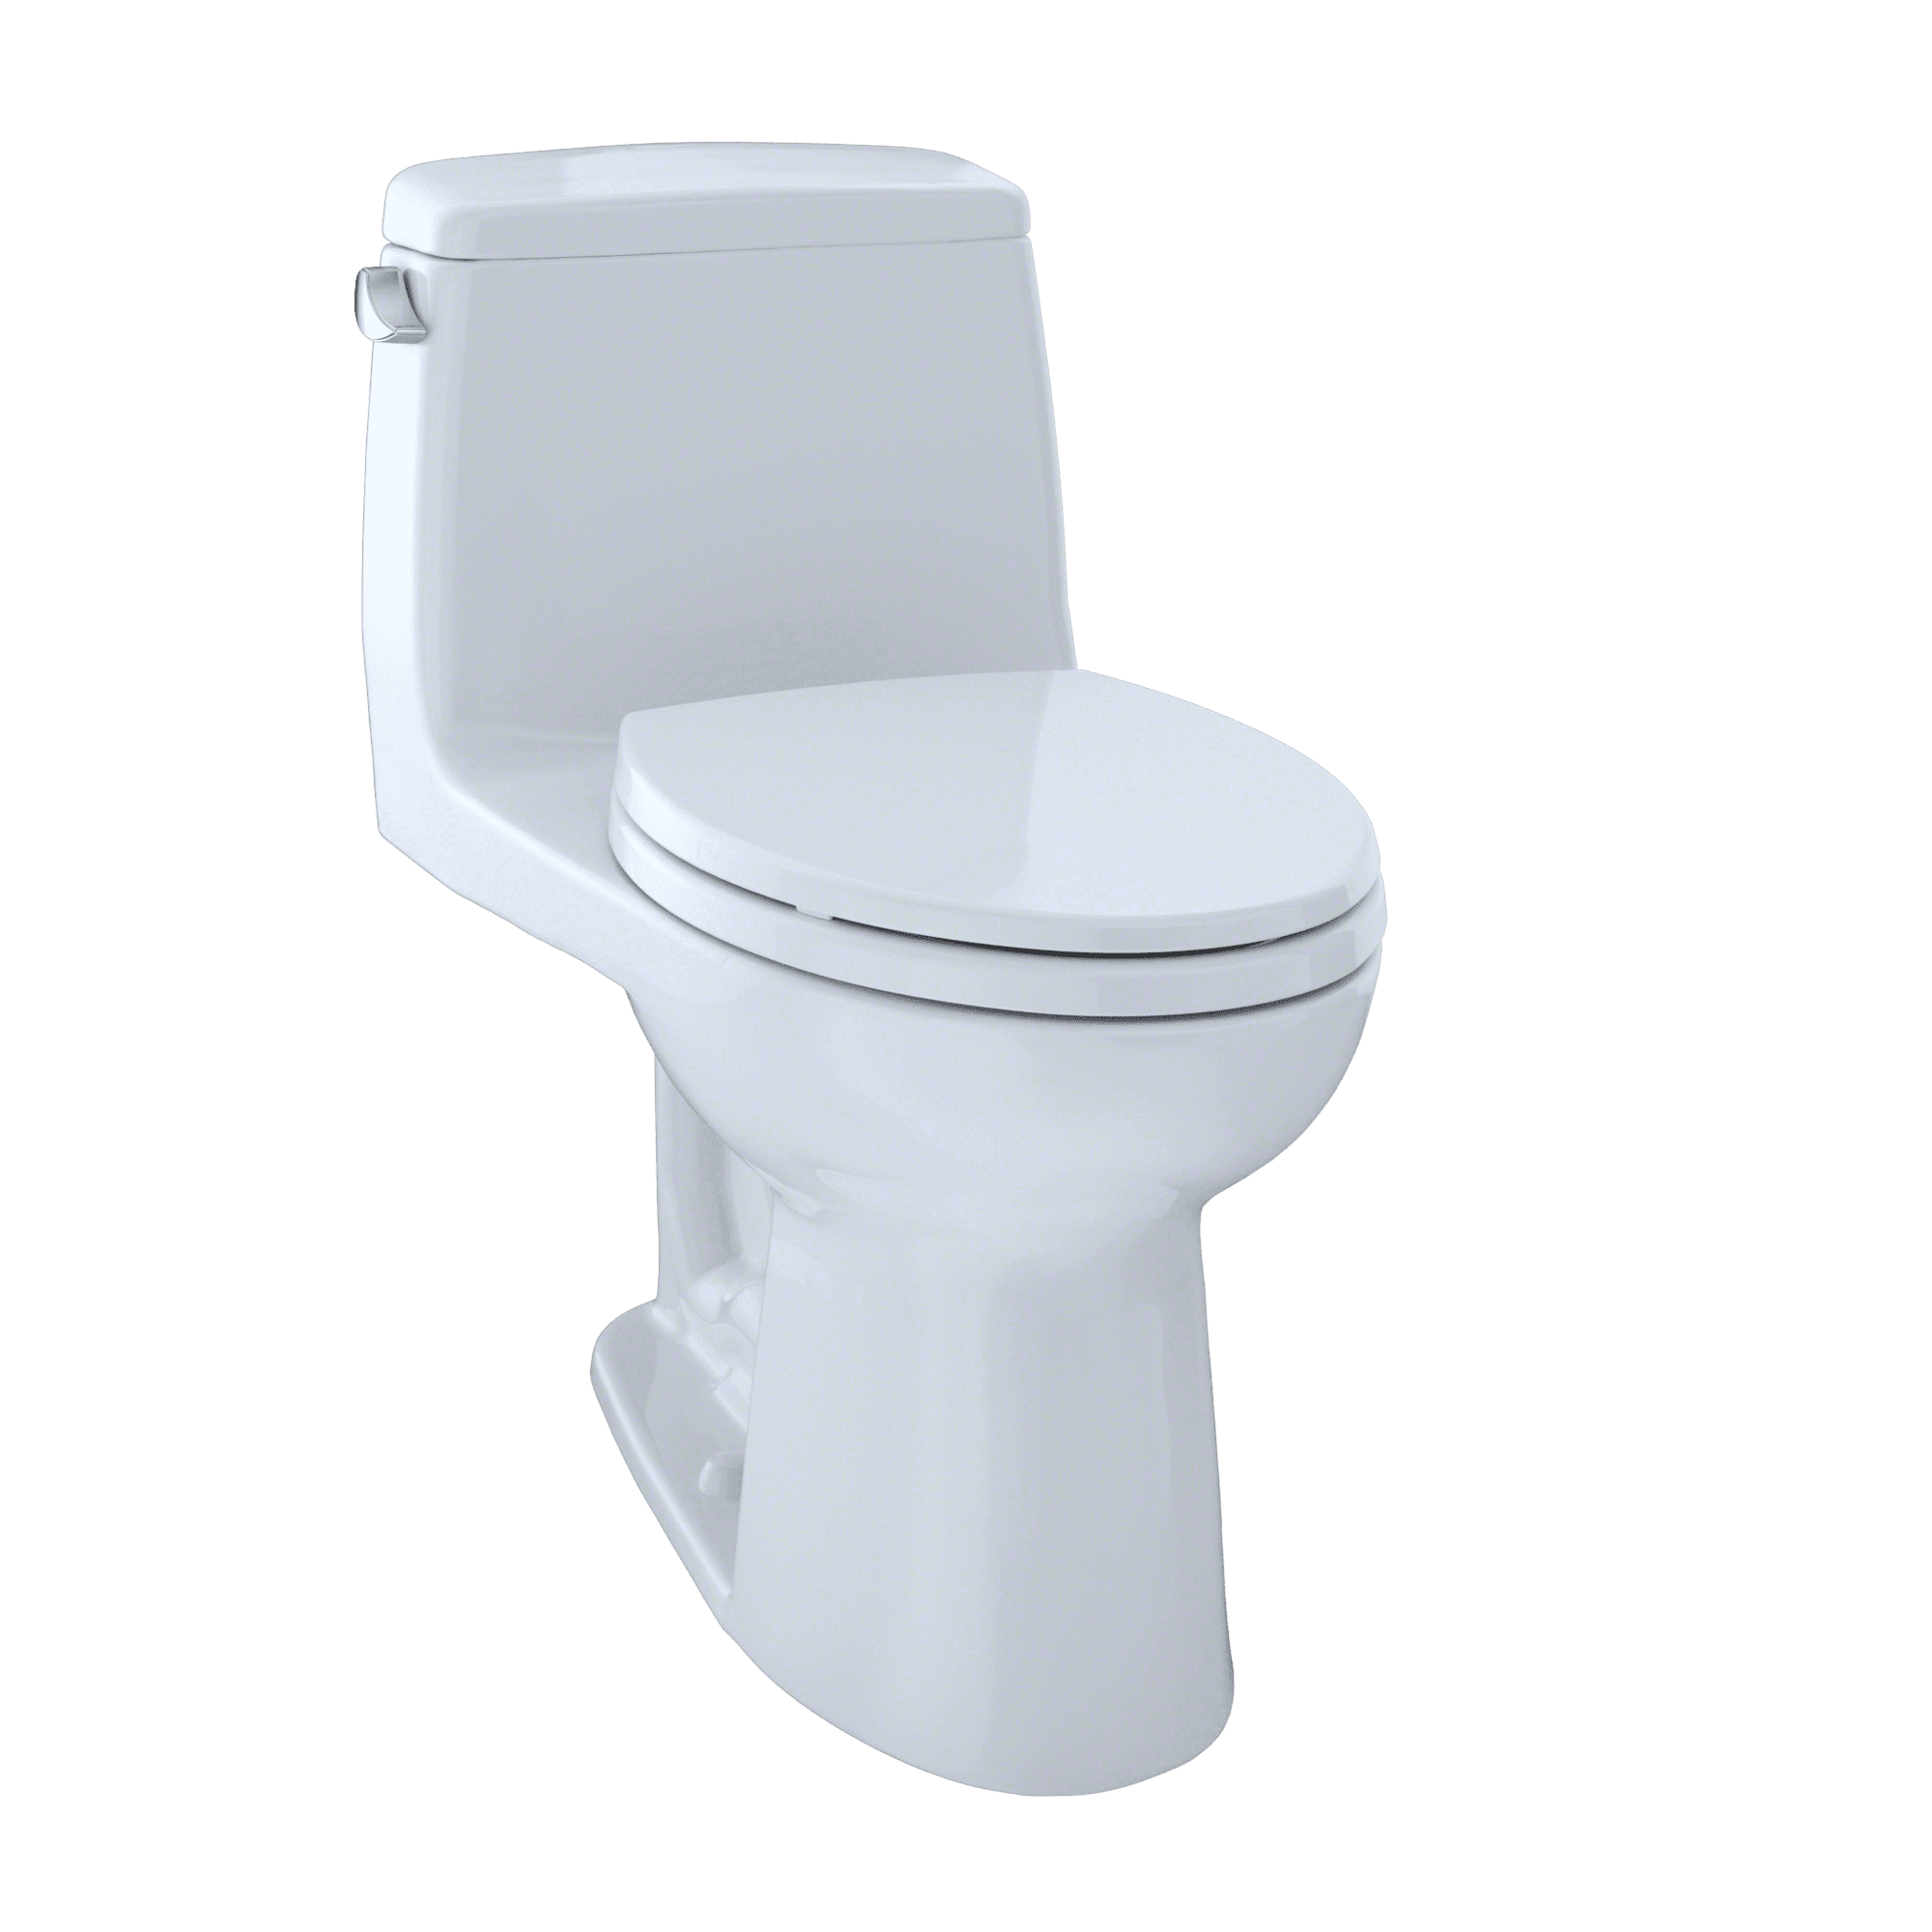 2-Piece Cotton White Toto CST416M-01 Aquia II Toilet with Regular Height Bowl and Dual Max Tank 